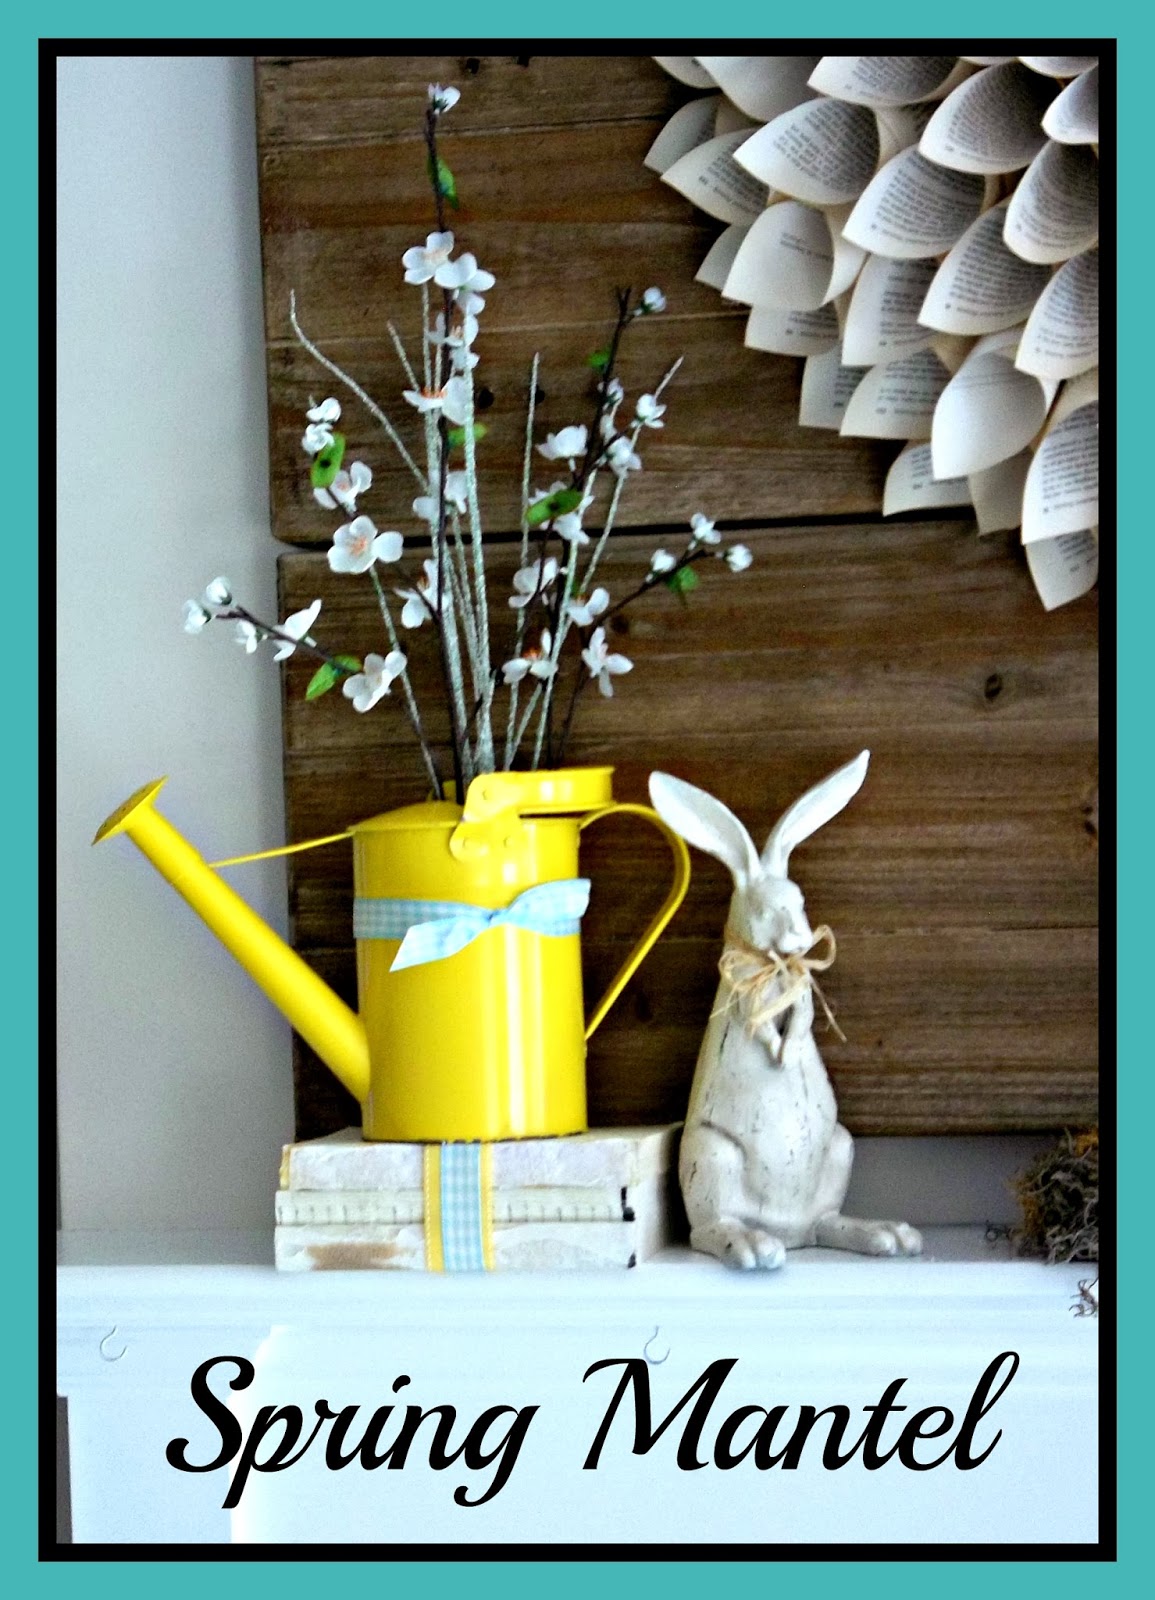 Spring Mantel - vintage rabbit and watering can